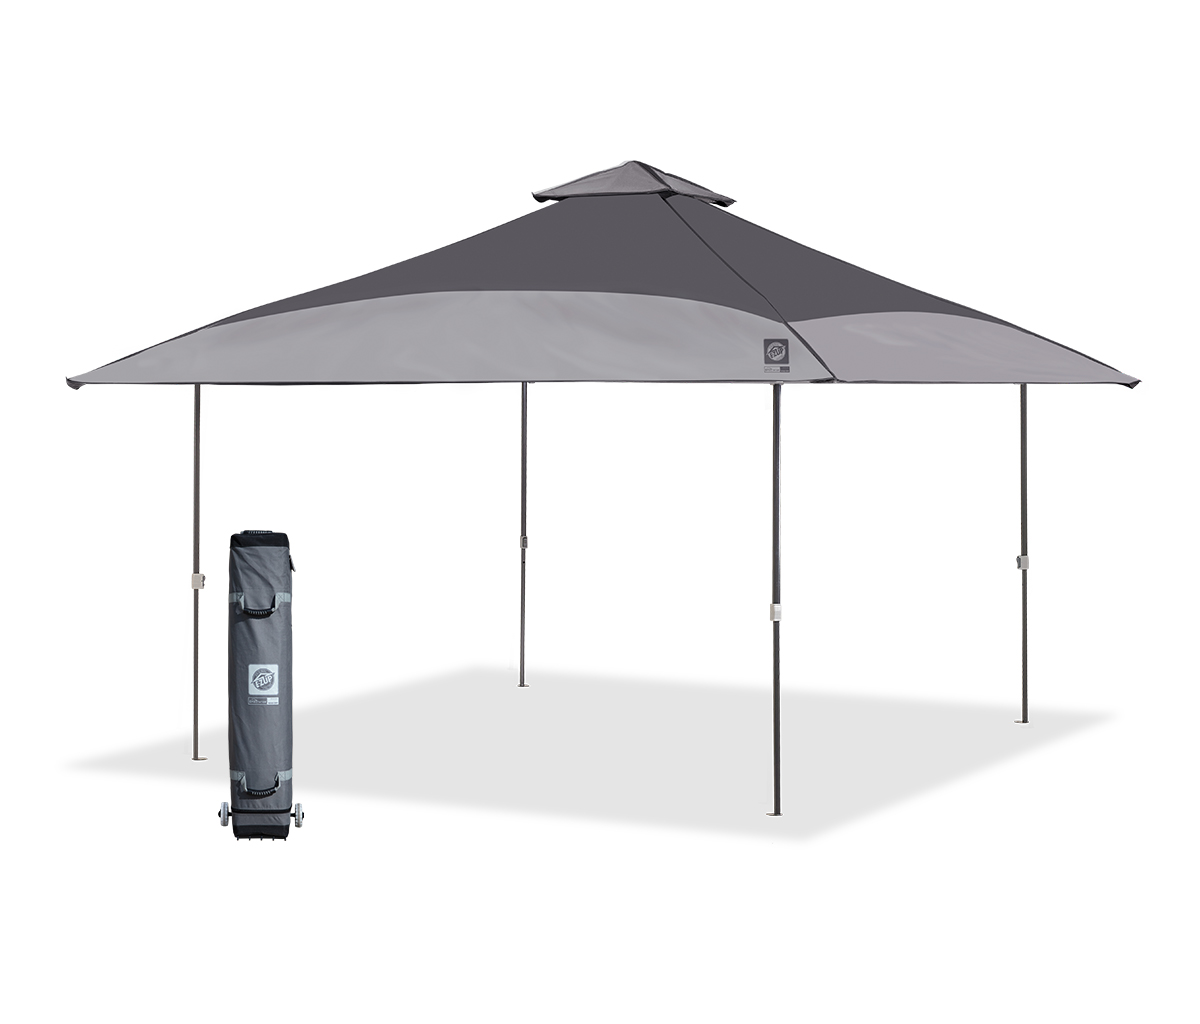 E-Z Up Spectator Instant Shelter Outdoor Canopy, 13 ft x 13 ft, Steel Gray/Cool Gray Top w/ Steel Gray Frame - image 1 of 8